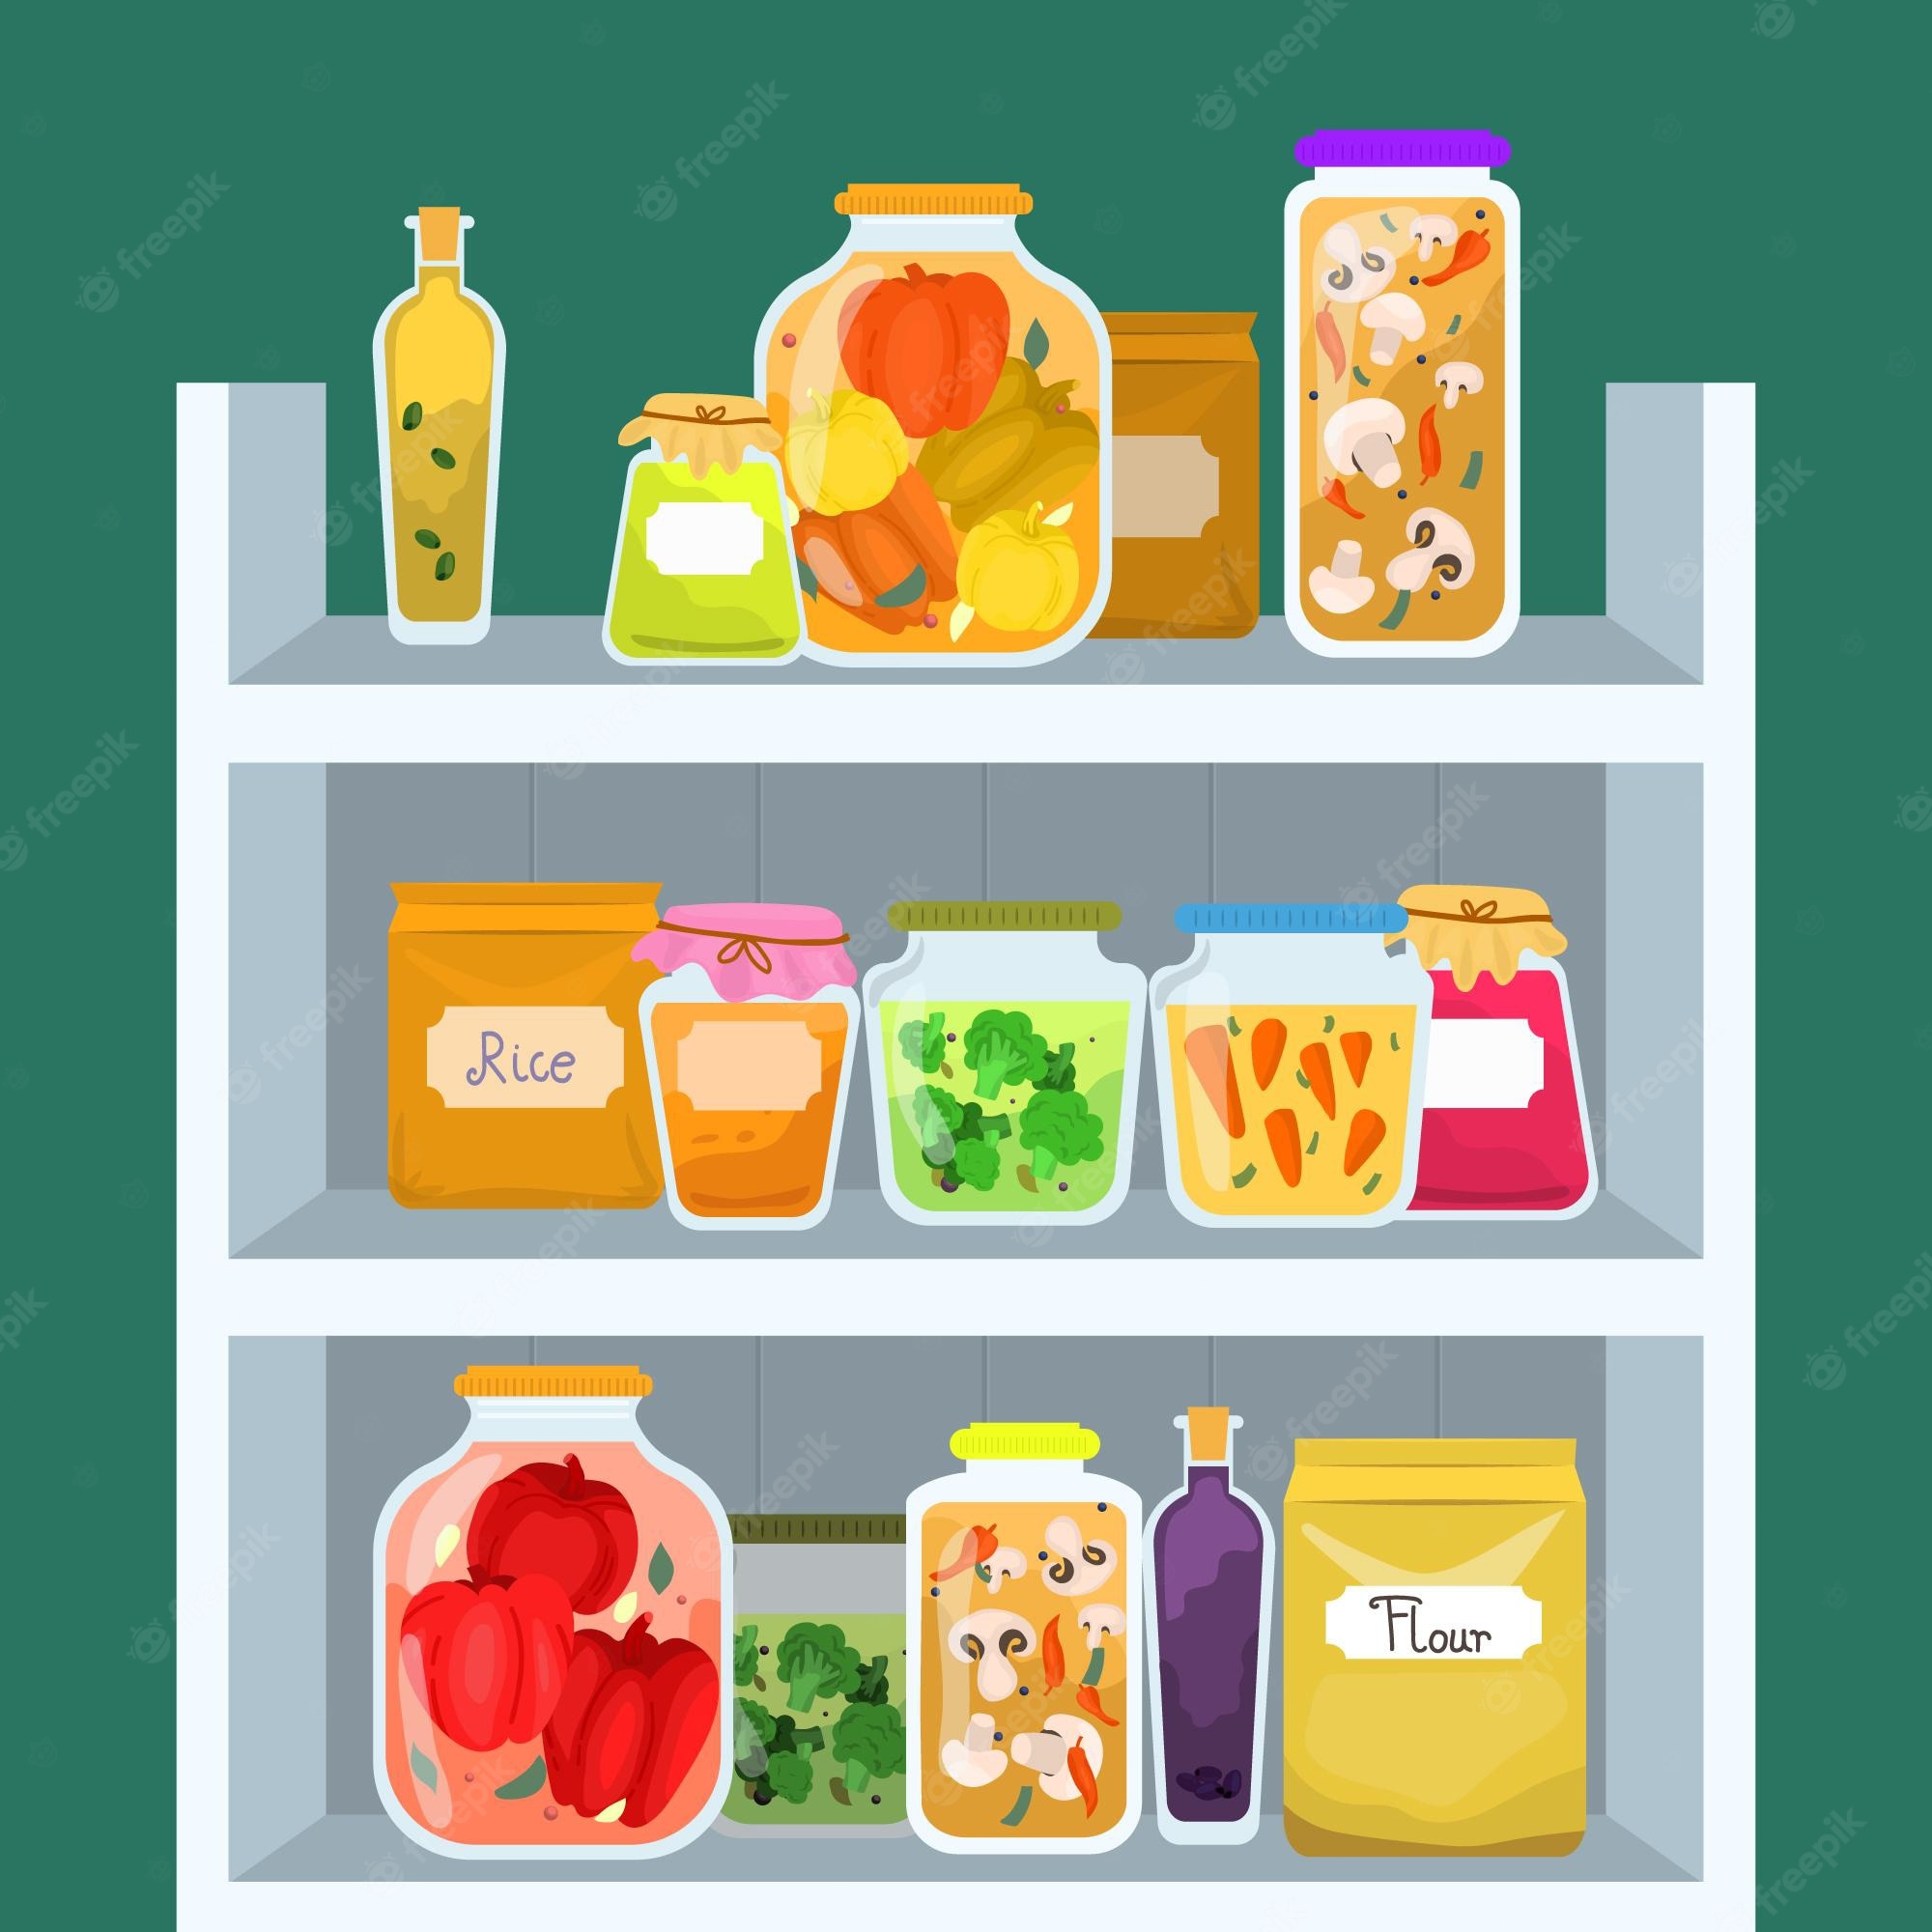 Different storage and containers Royalty Free Vector Image